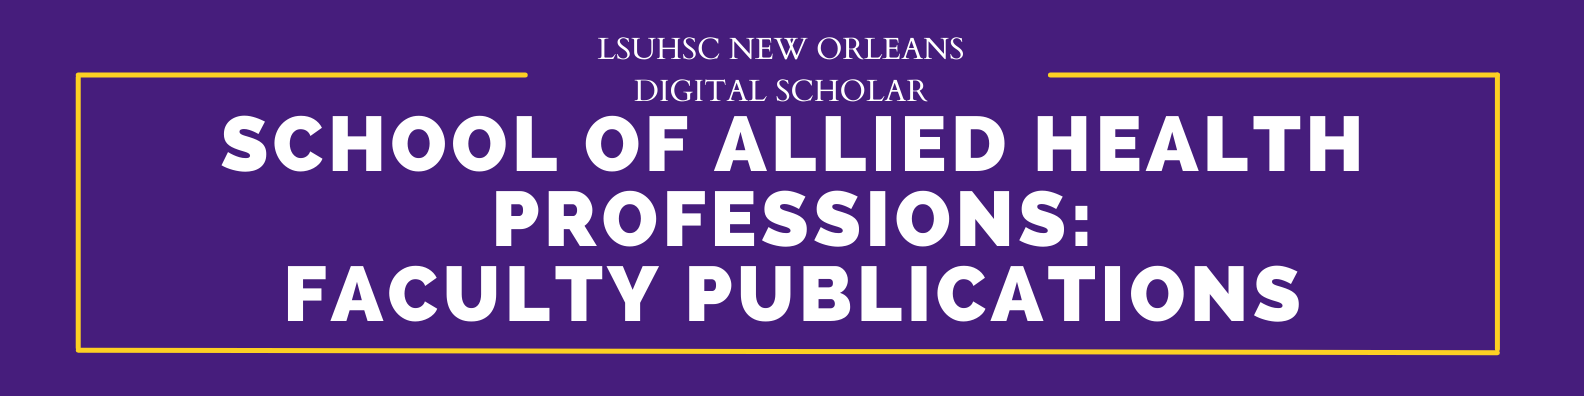 School of Allied Health Professions Faculty Publications